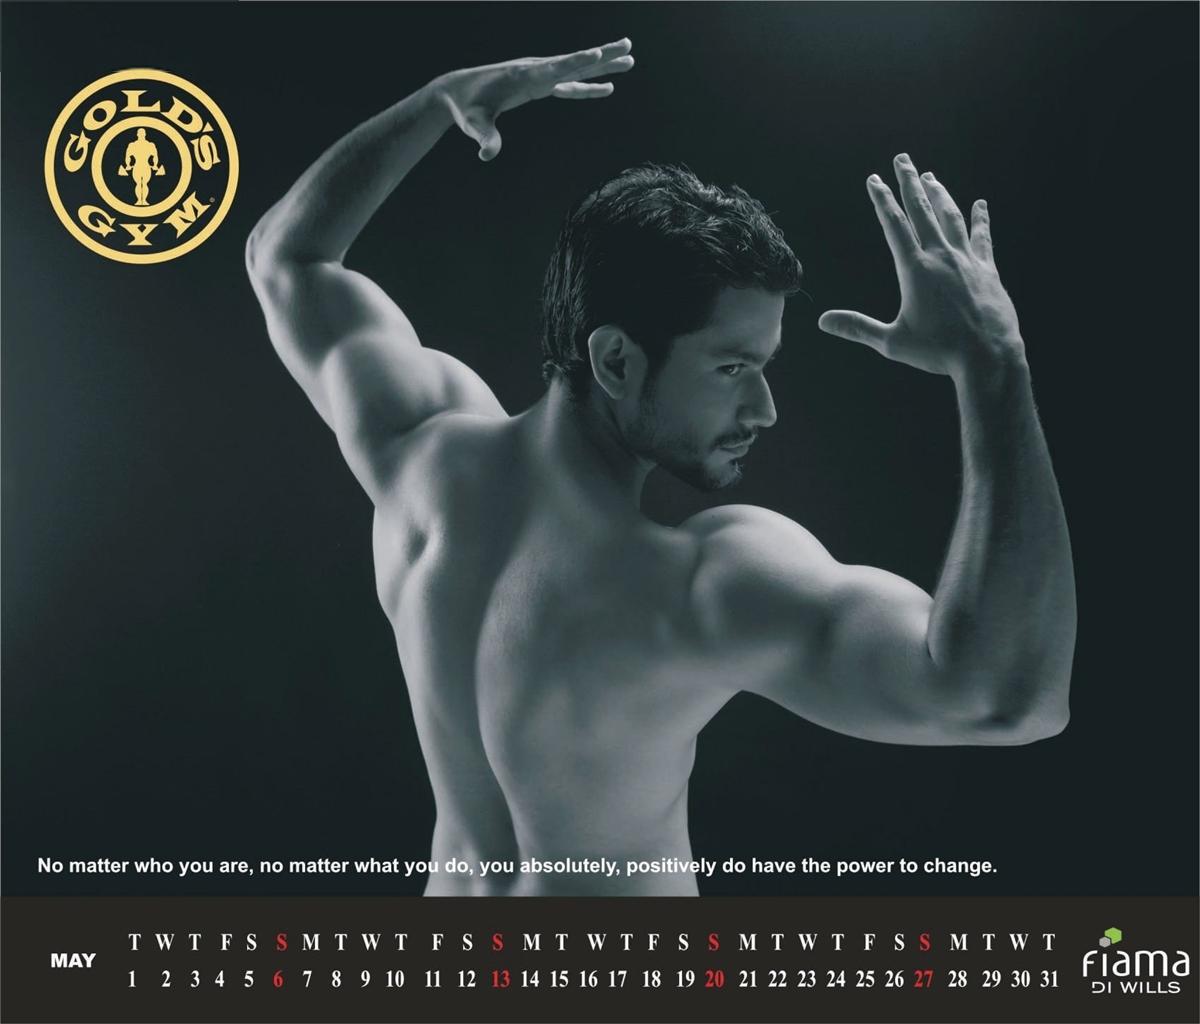 Gold S Gym India Calendar More Wallpaper After The Break